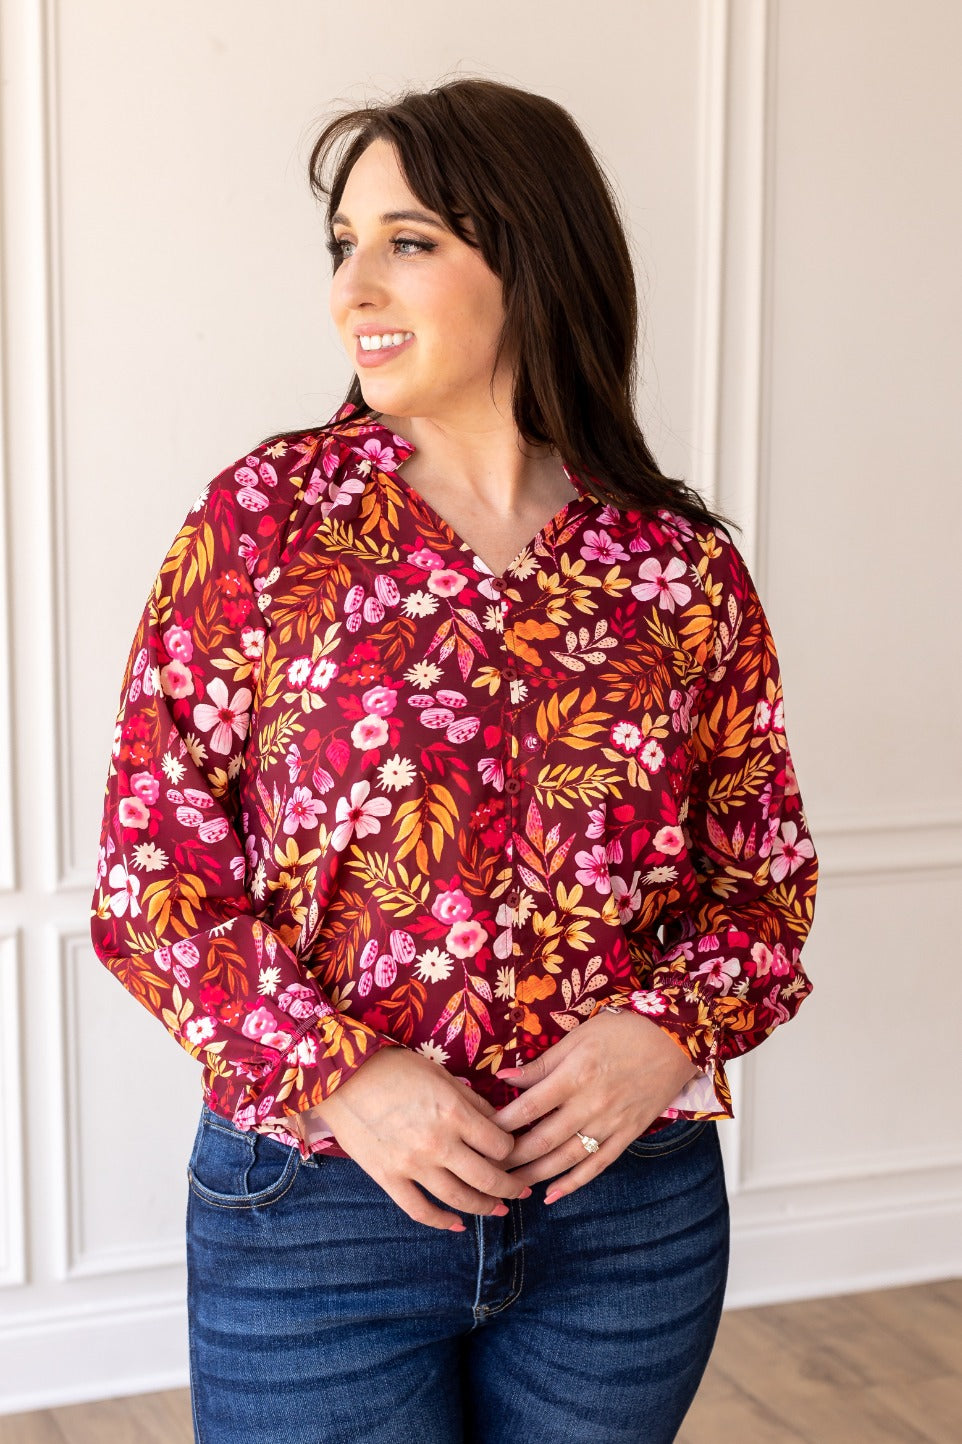 The Valerie Top